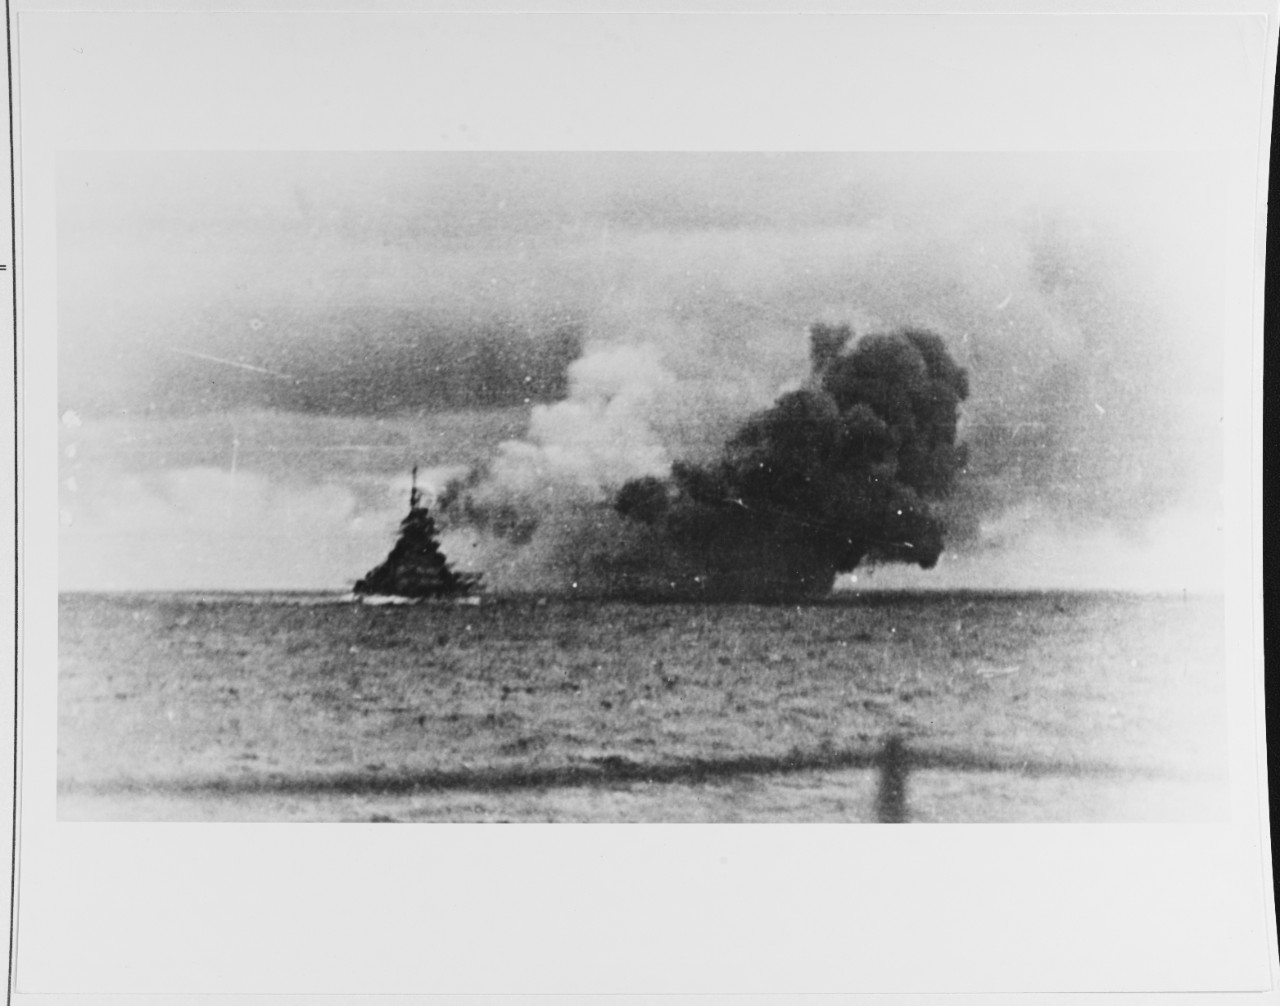 Photo #: NH 69729  Battle of the Denmark Strait, 24 May 1941